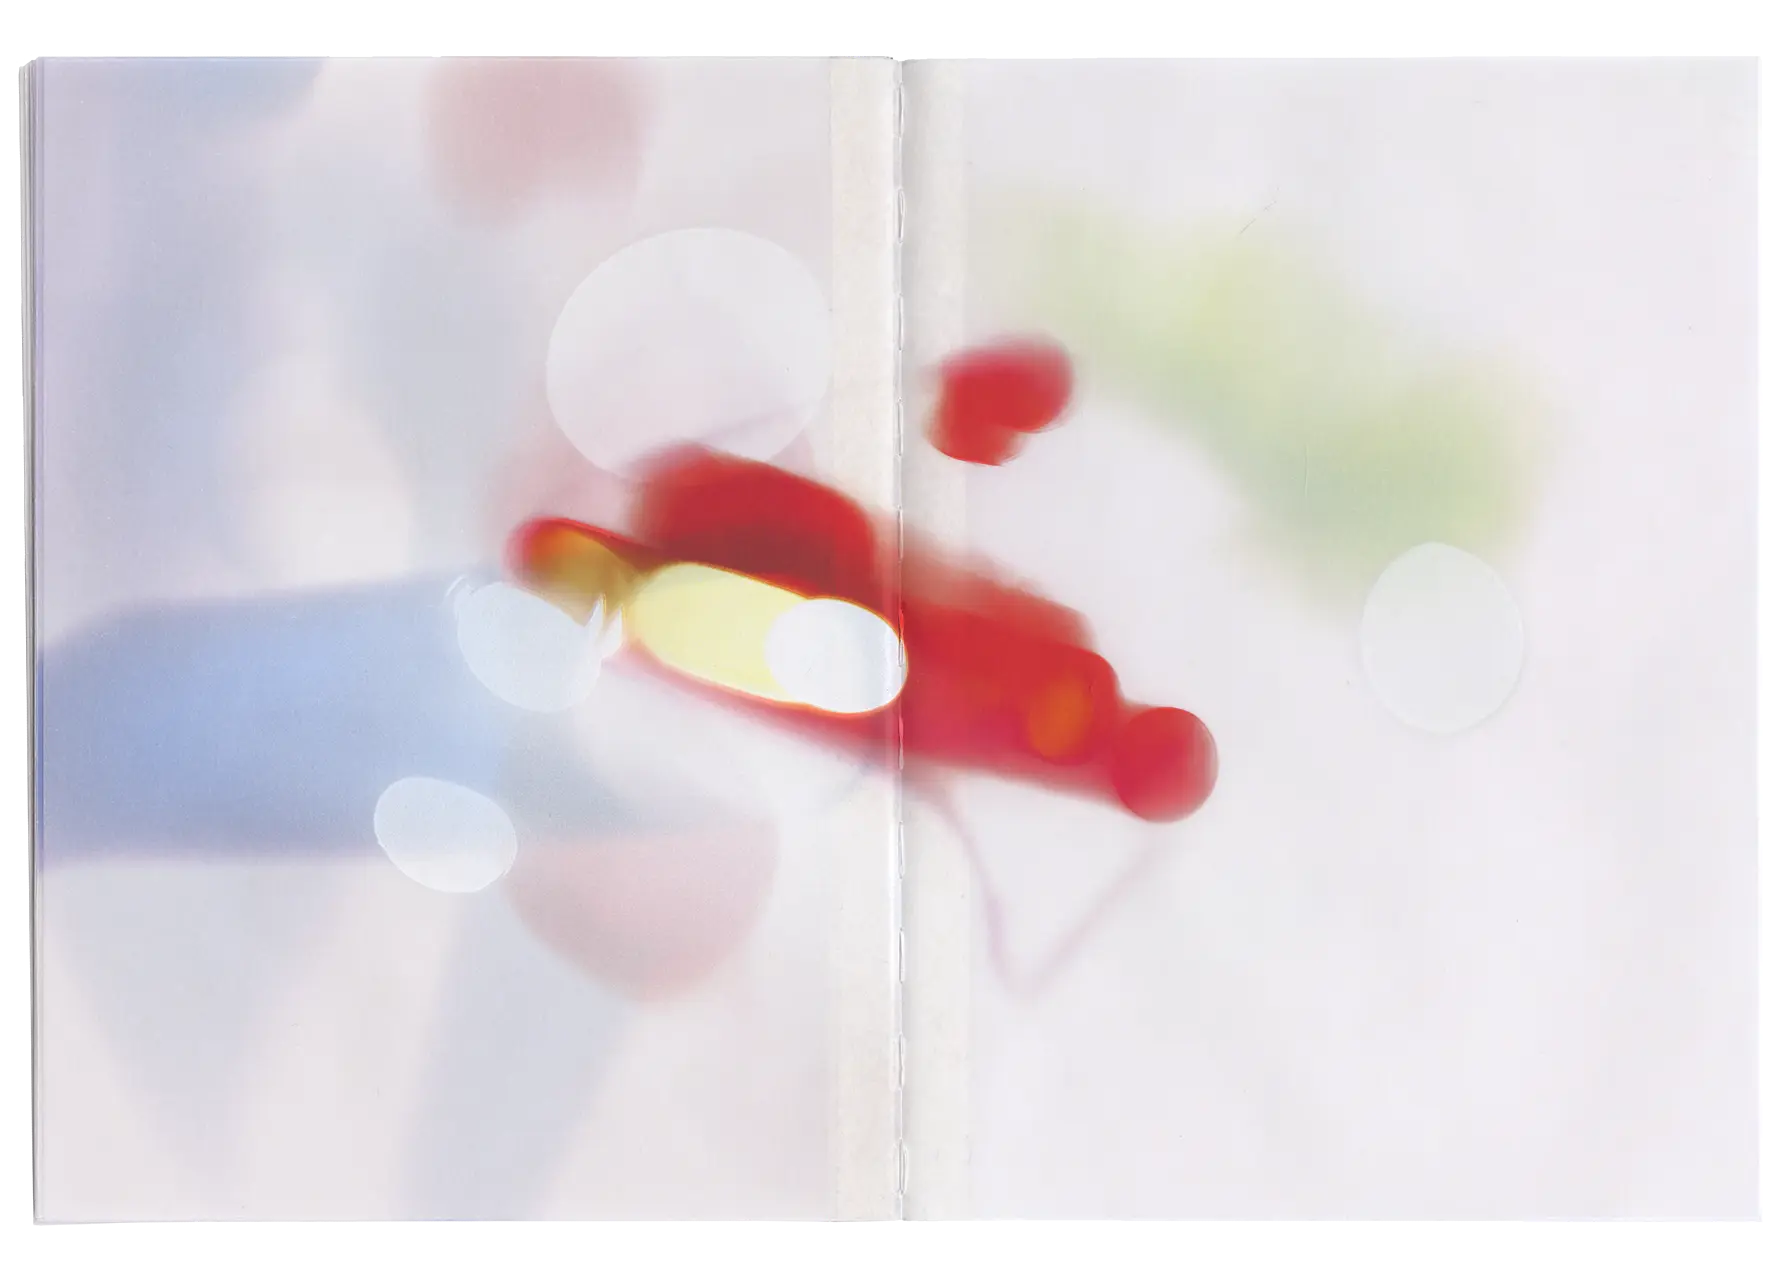 Fifteenth spread of the Bloom book, in this spread is the blur and extracted bloom of a white car’s red rear brake light. Notably, the images were printed using a UV printer directly onto the pre-bound pages. As a result, the binding thread in the book's seam has taken on some of the color from the images.